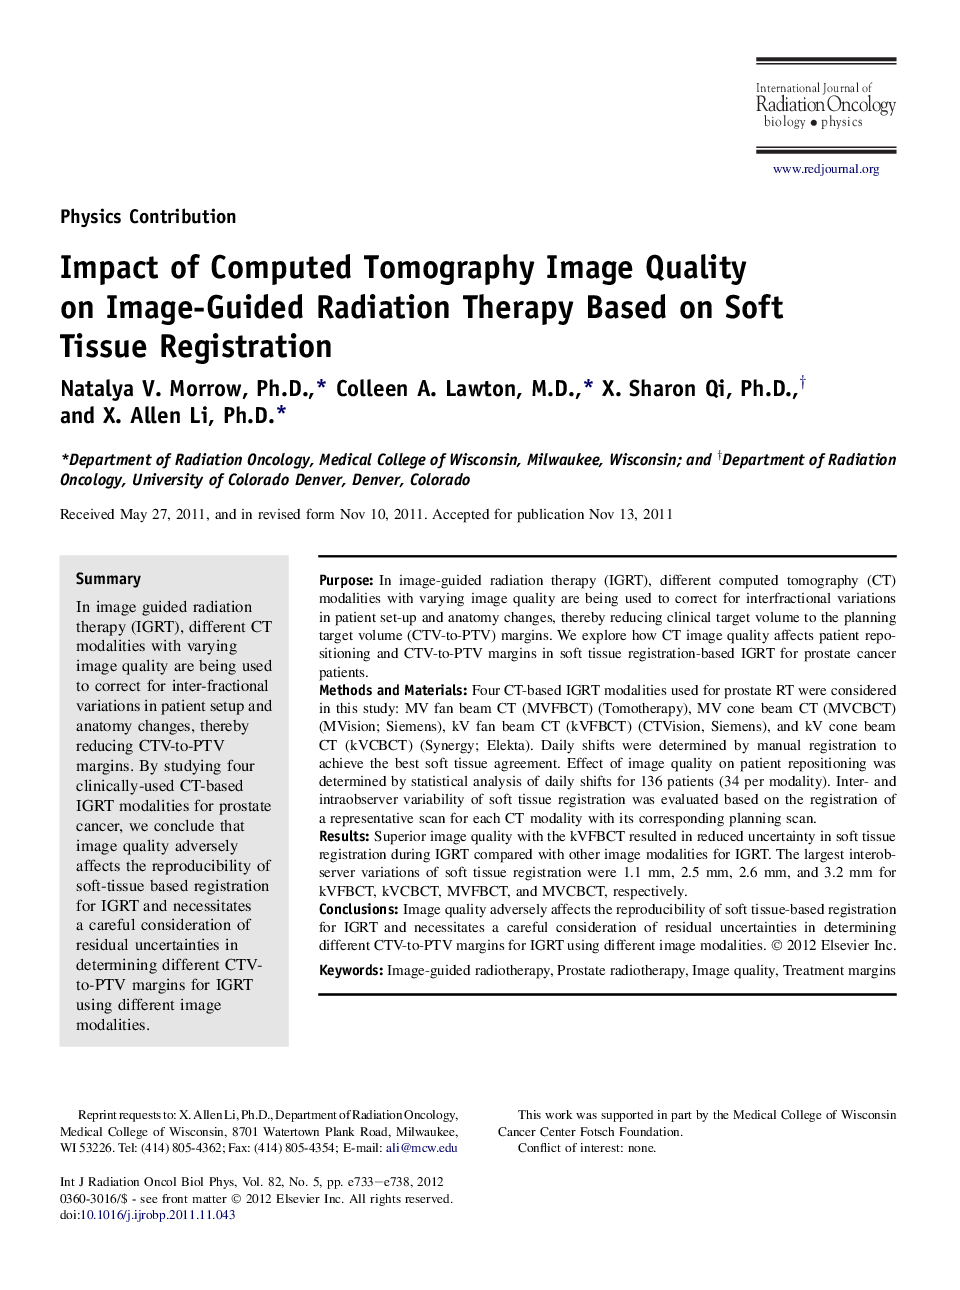 Impact of Computed Tomography Image Quality on Image-Guided Radiation Therapy Based on Soft Tissue Registration